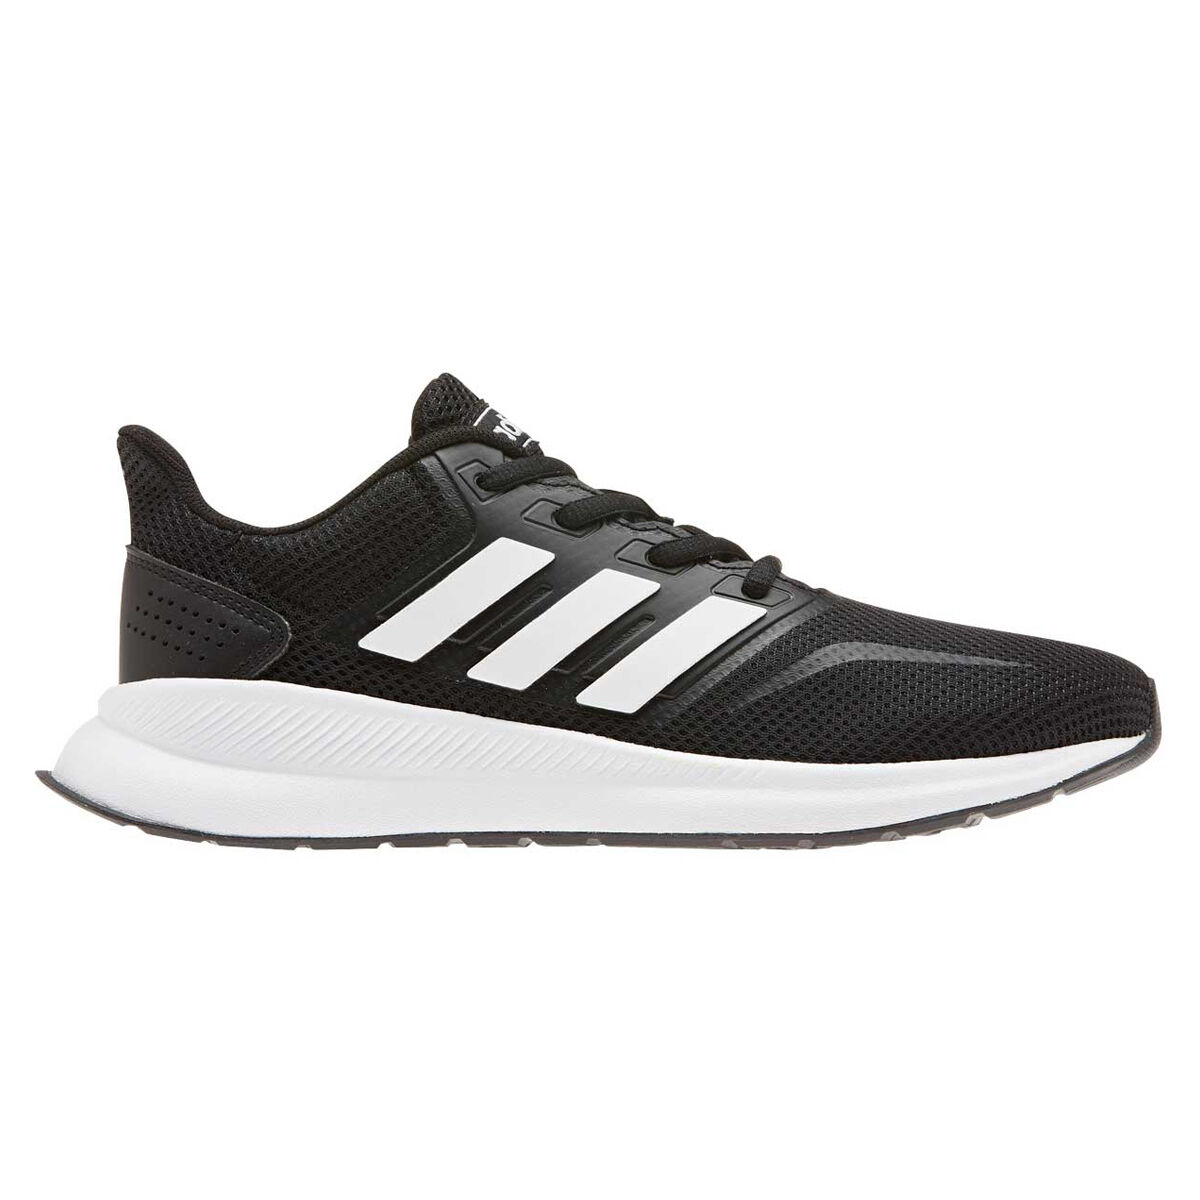 12+ Adidas Shoes For Kids Black And White Gallery